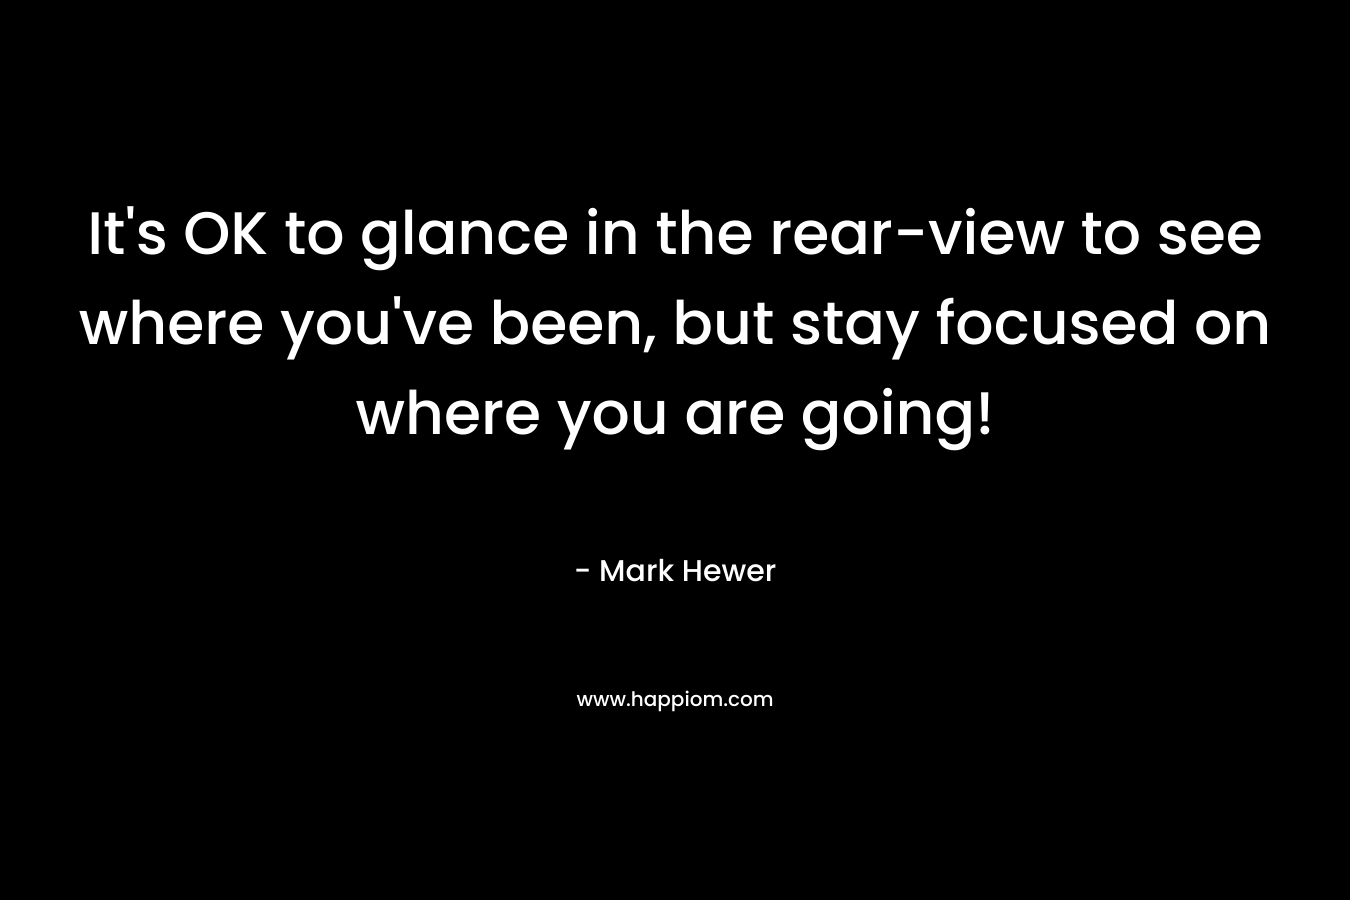 It’s OK to glance in the rear-view to see where you’ve been, but stay focused on where you are going! – Mark Hewer